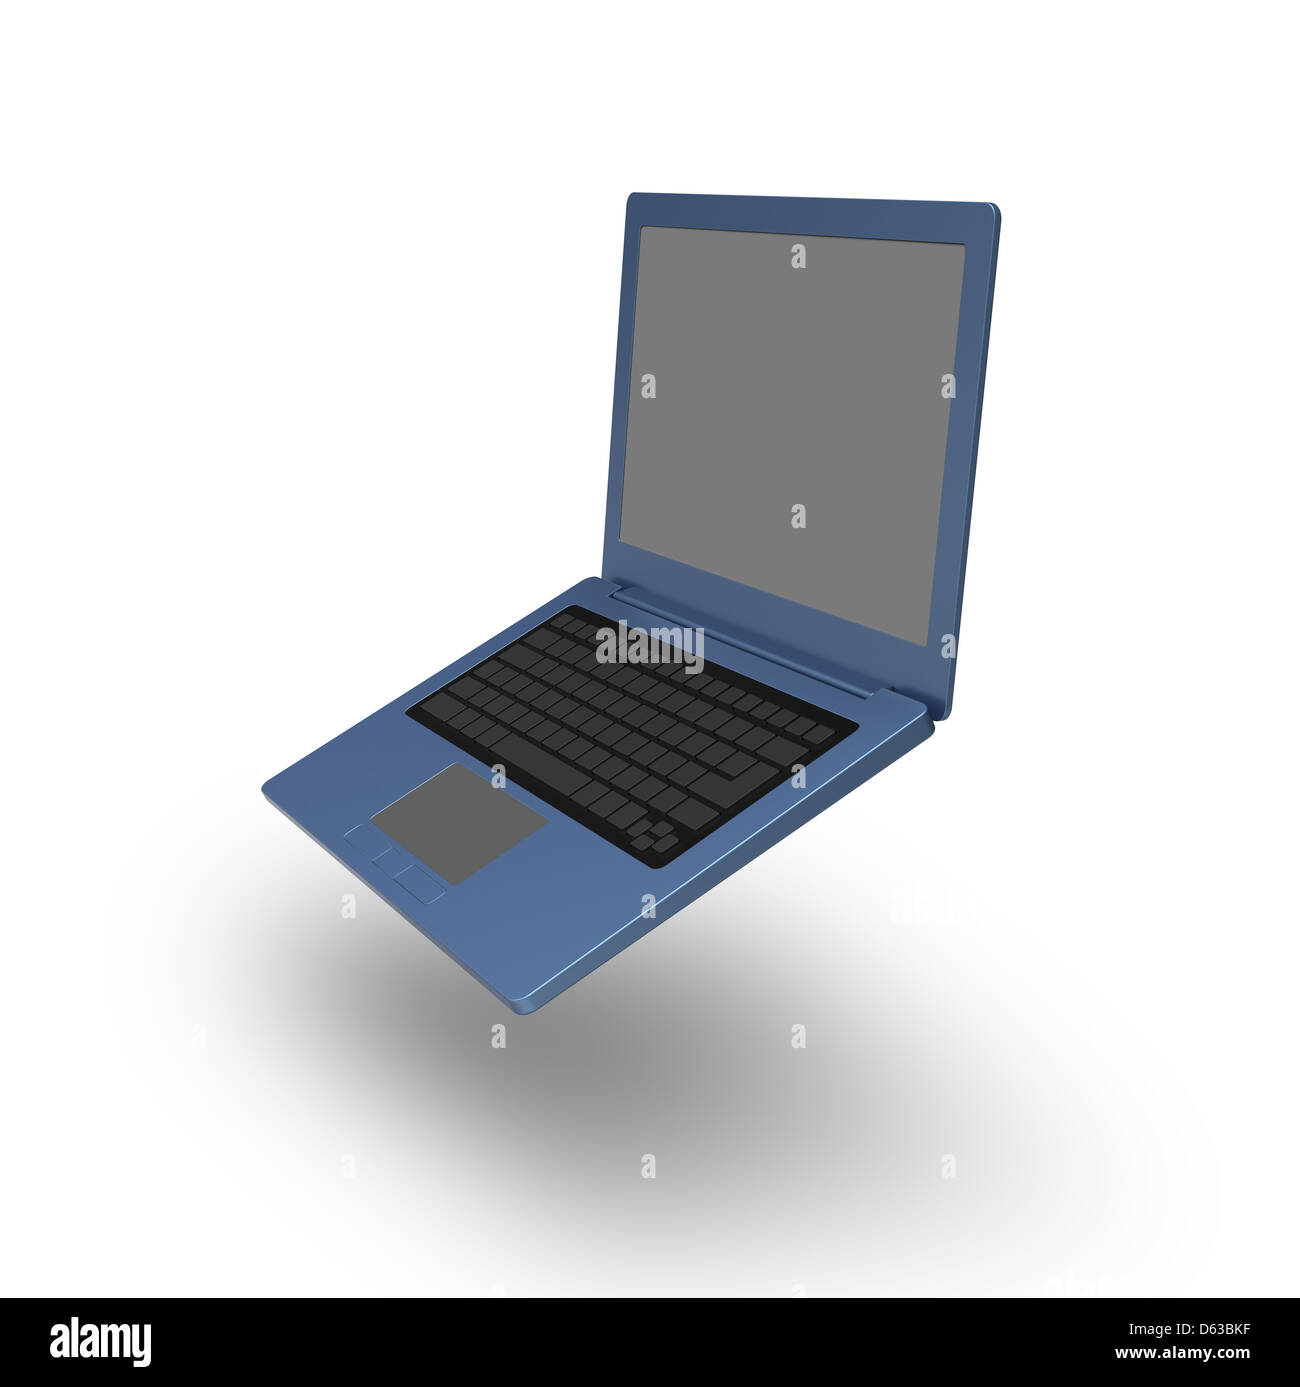 3D model of blue laptop with blank keyboard and simple design on white background Stock Photo